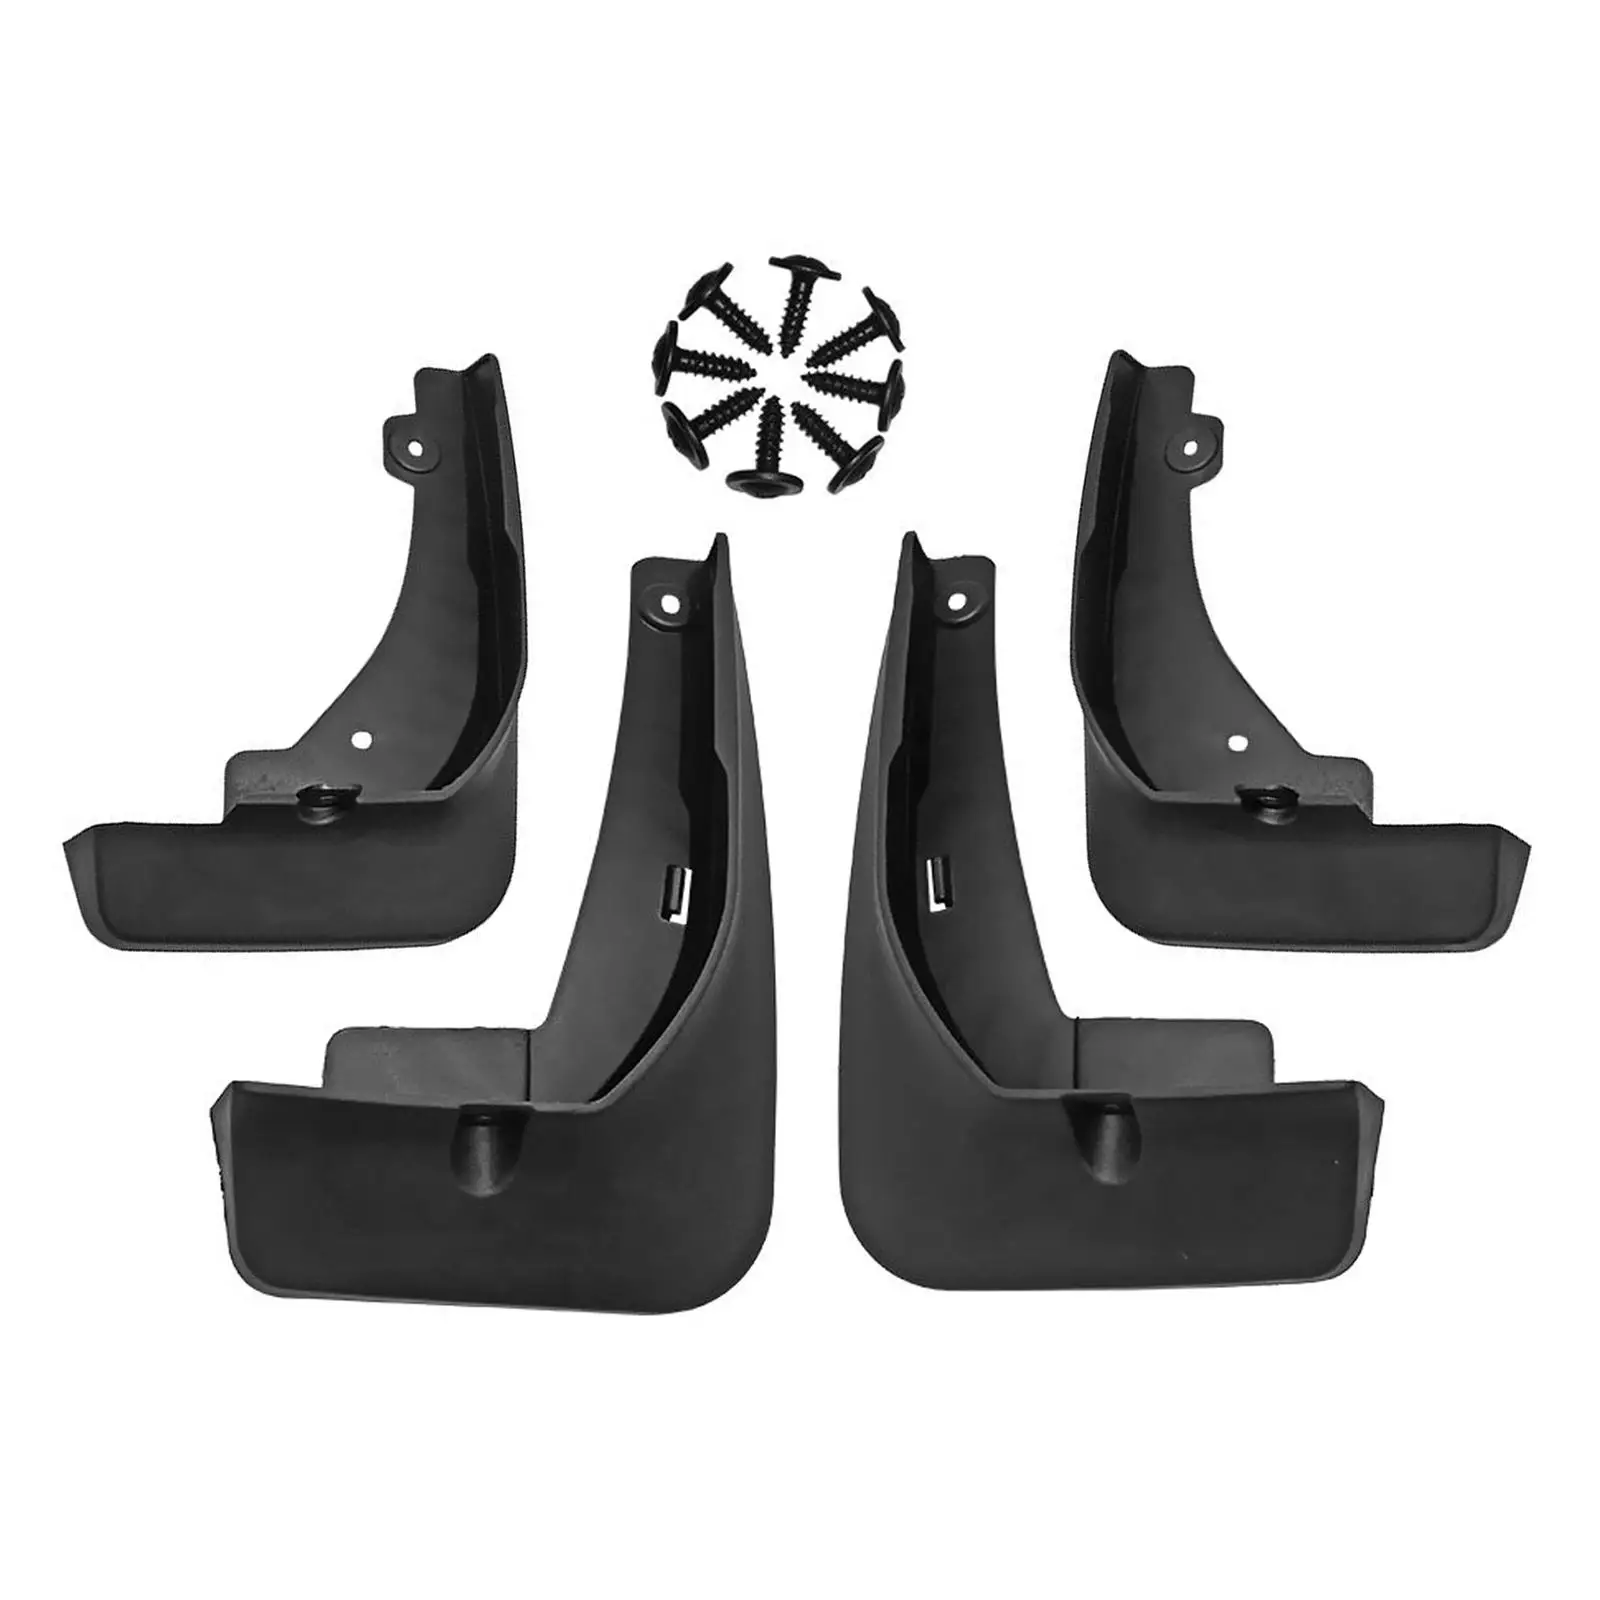 4x Car Mud Flaps Car Accessories Protection Spare Parts Premium Mudflaps for Toyota Corolla Cross No Drilling Required